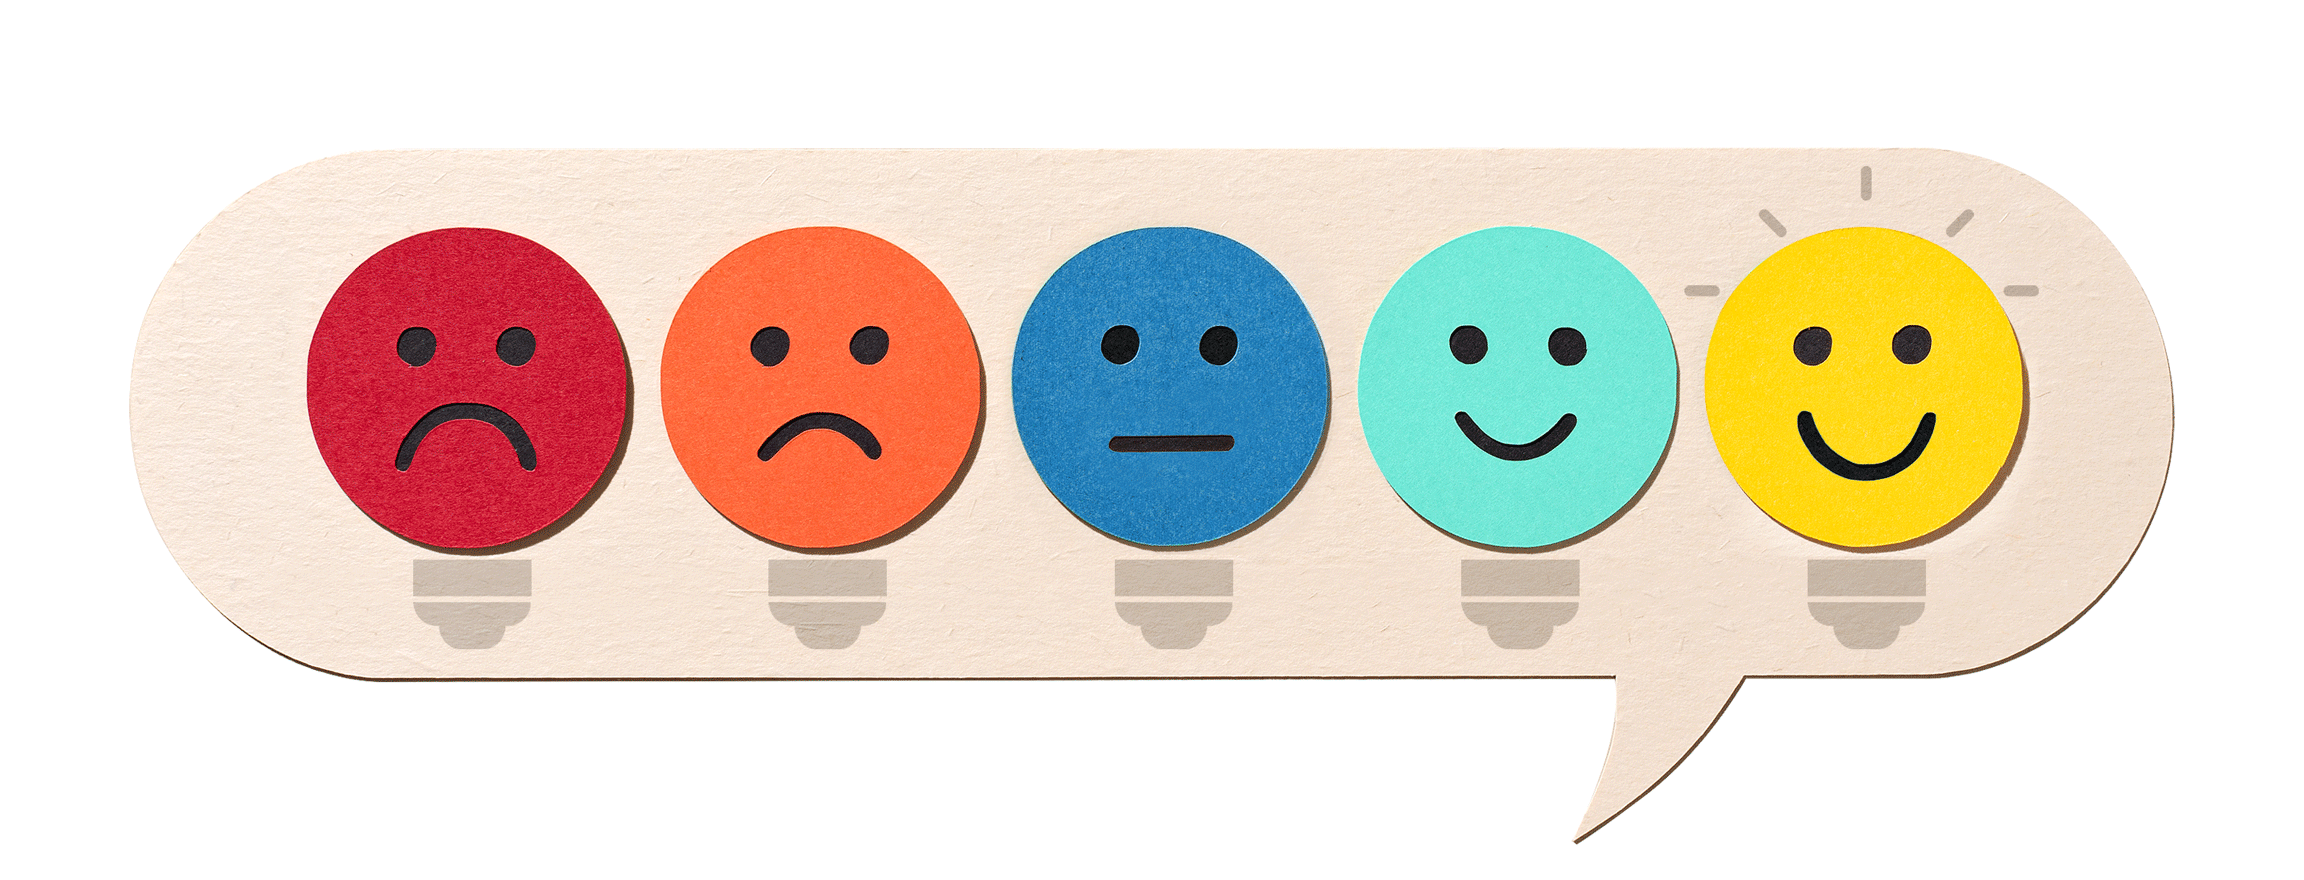 spectrum of unhappy-to-happy lightbulbs in chat bubble